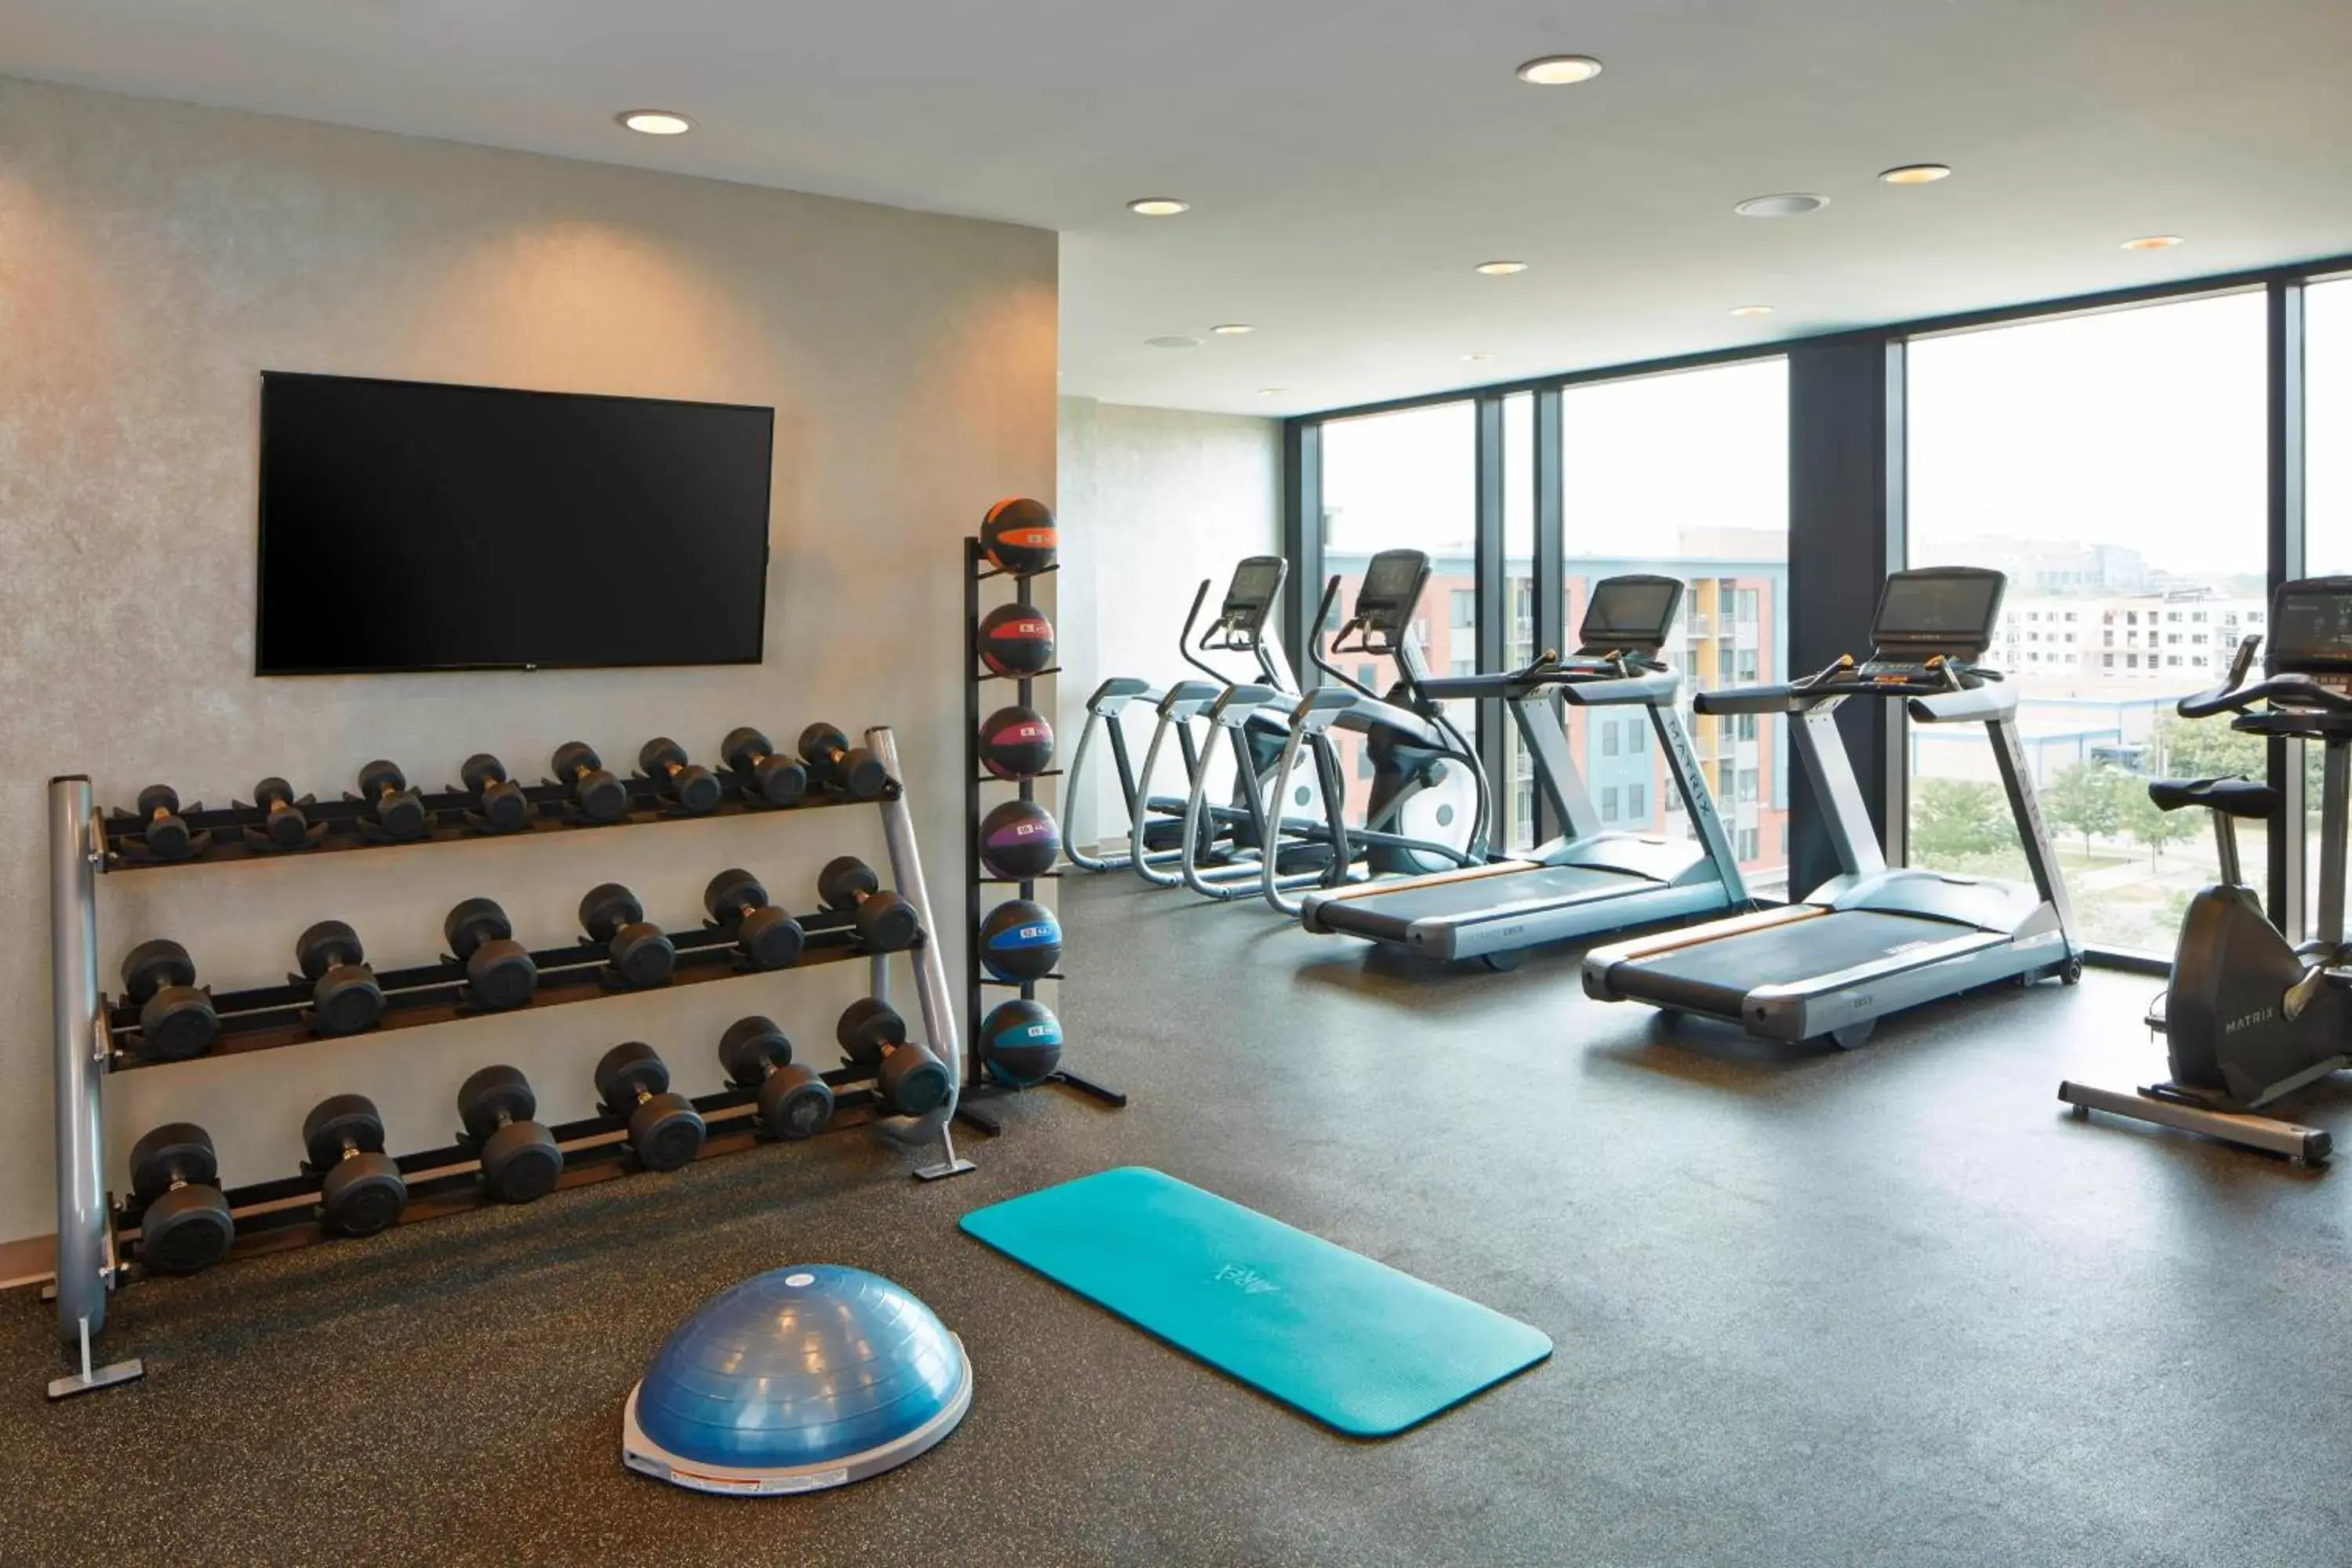 Fitness centre/facilities, Fitness Center/Facilities in AC Hotel by Marriott Des Moines East Village